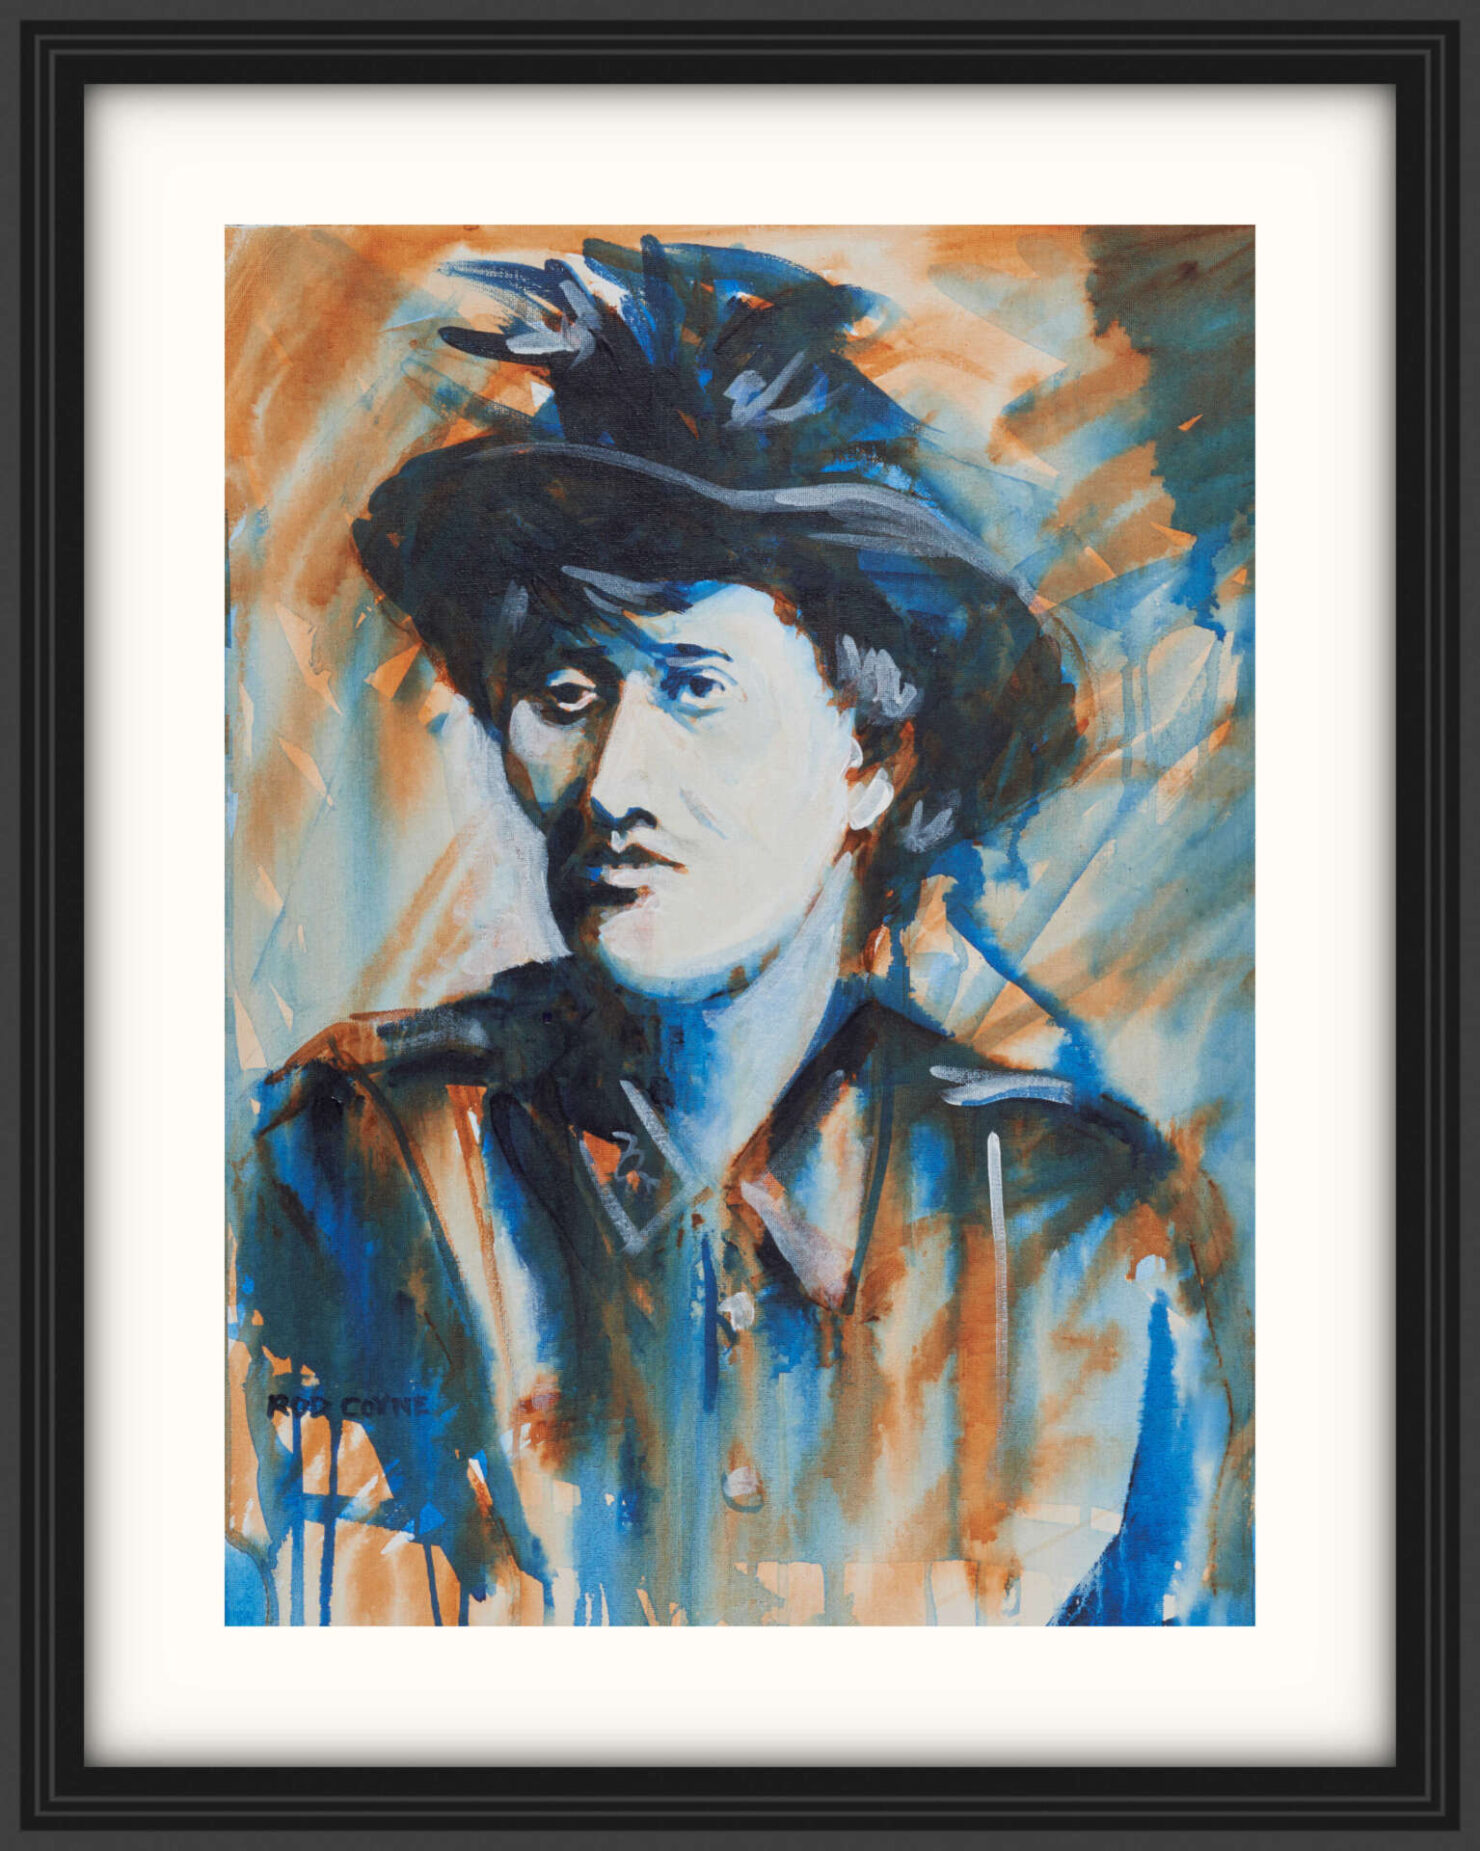 artist rod coyne's portrait "Countess Markievicz 1916" is shown here, on a white mount in a black frame.